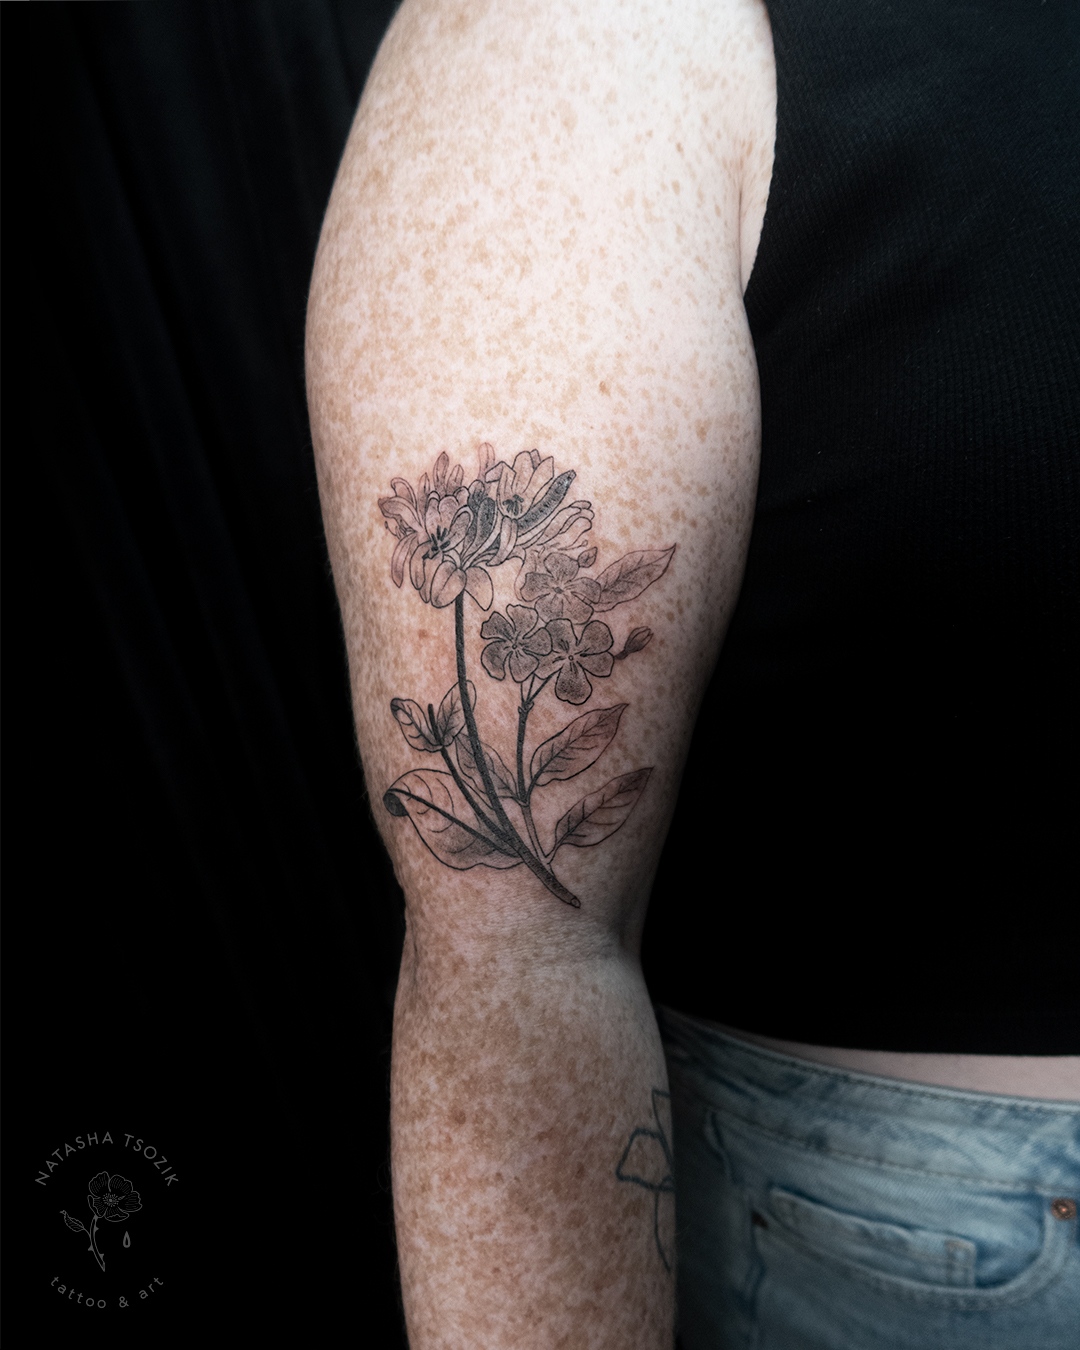 Friendship – floral tattoo on an arm with freckles